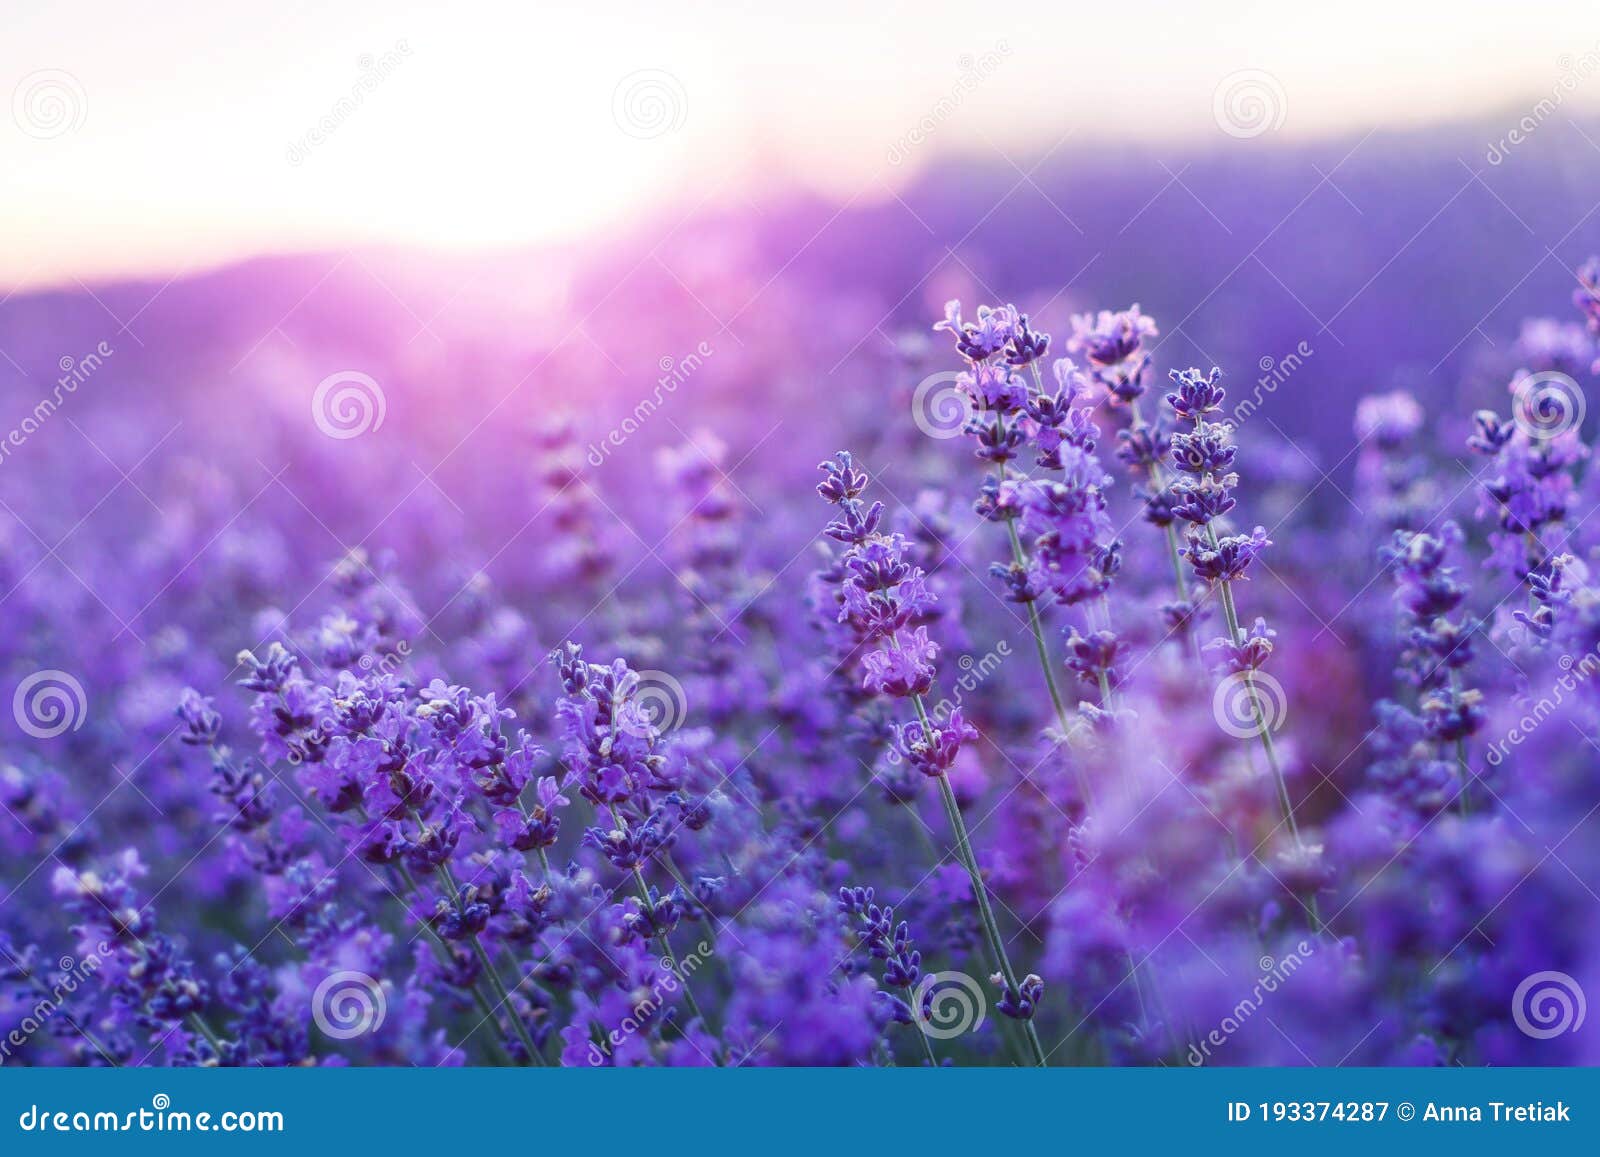 Blurred Nature Scenes. Lavender Flowers Beautiful Nature Field Scene in  Sunlight. Lavender Flower Background. Dawn in a Stock Image - Image of  freshness, color: 193374287